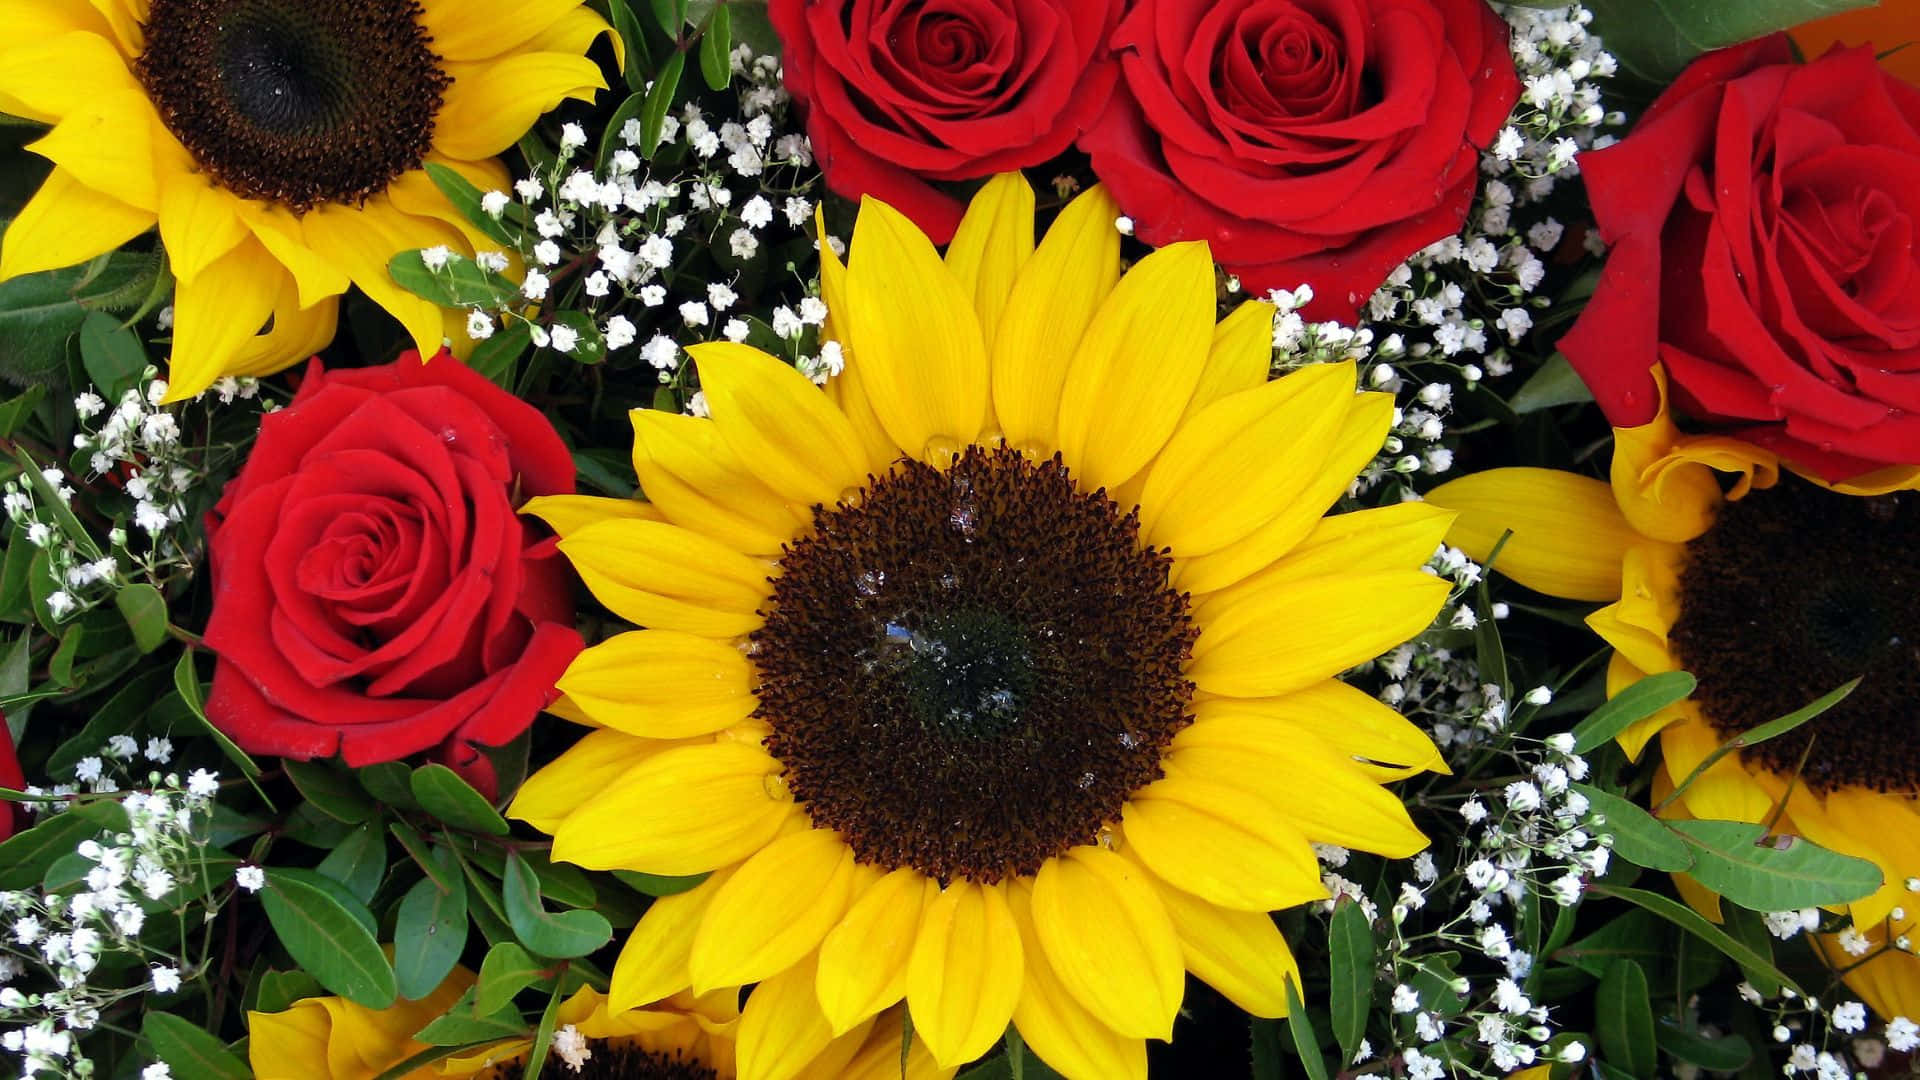 Fresh Sunflowers And Roses From Garden Wallpaper